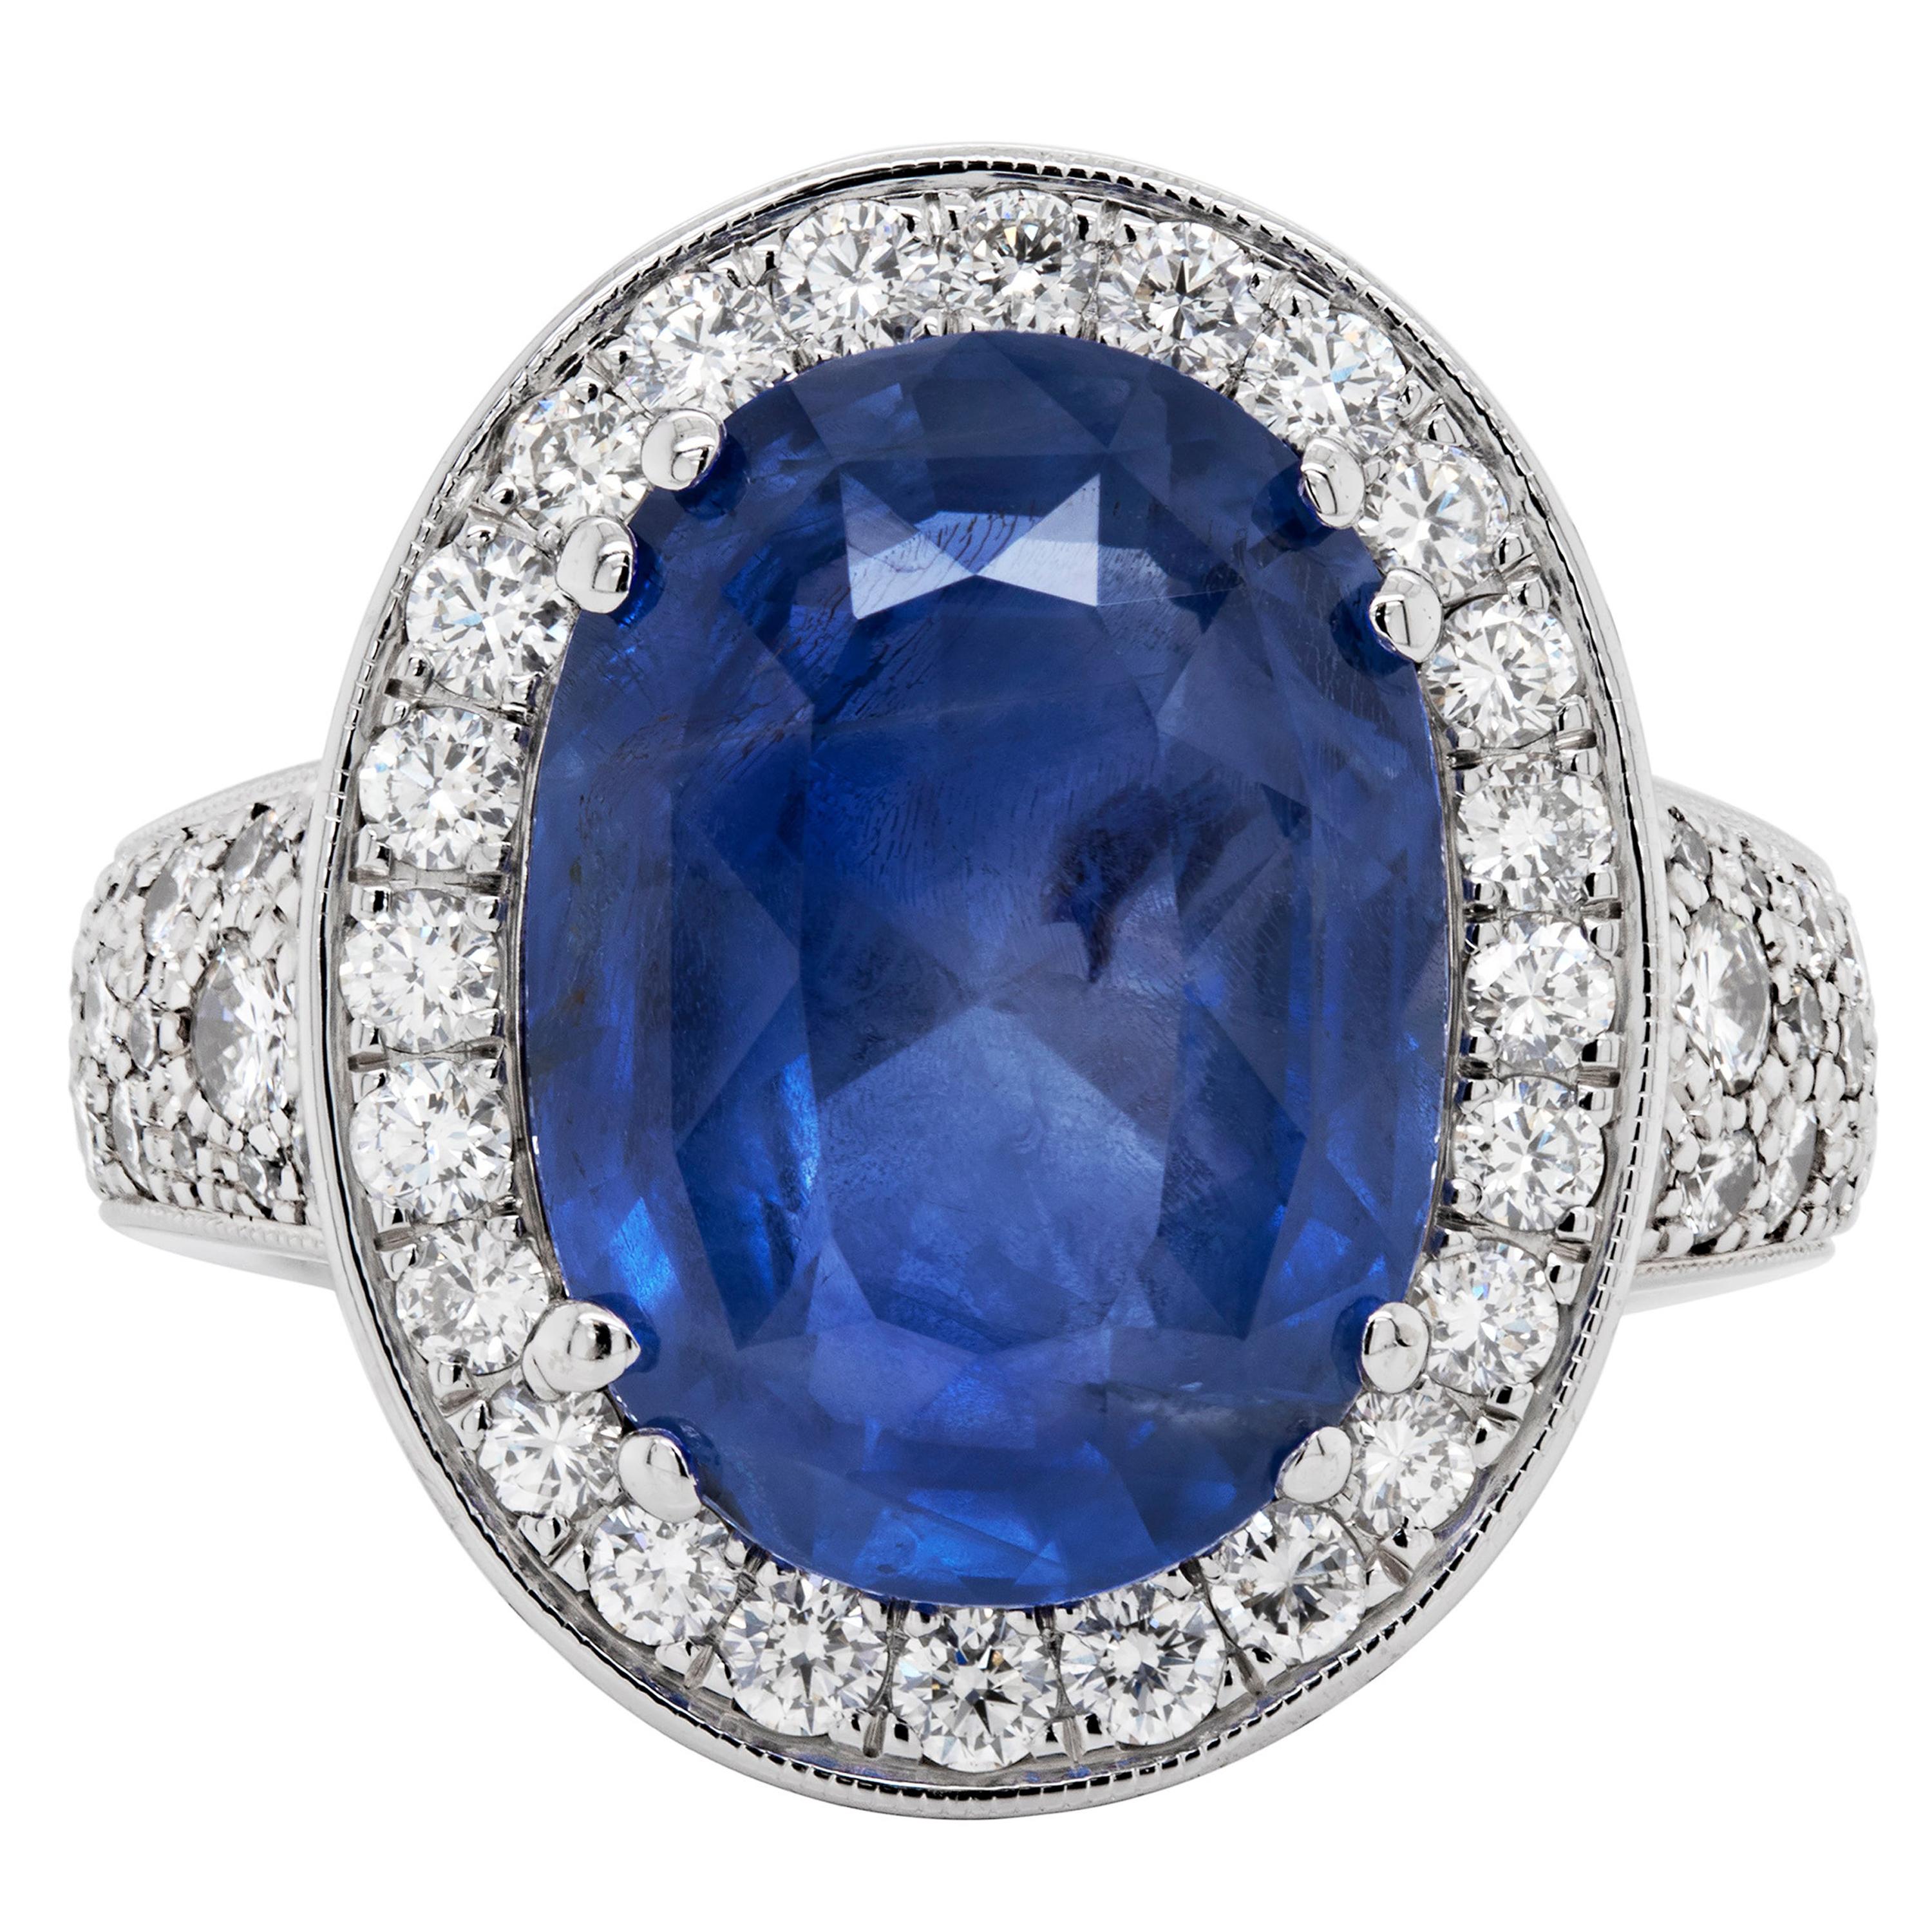 12.59 Carat Natural Unheated Oval Blue Sapphire and Diamond 18 Carat Gold Ring